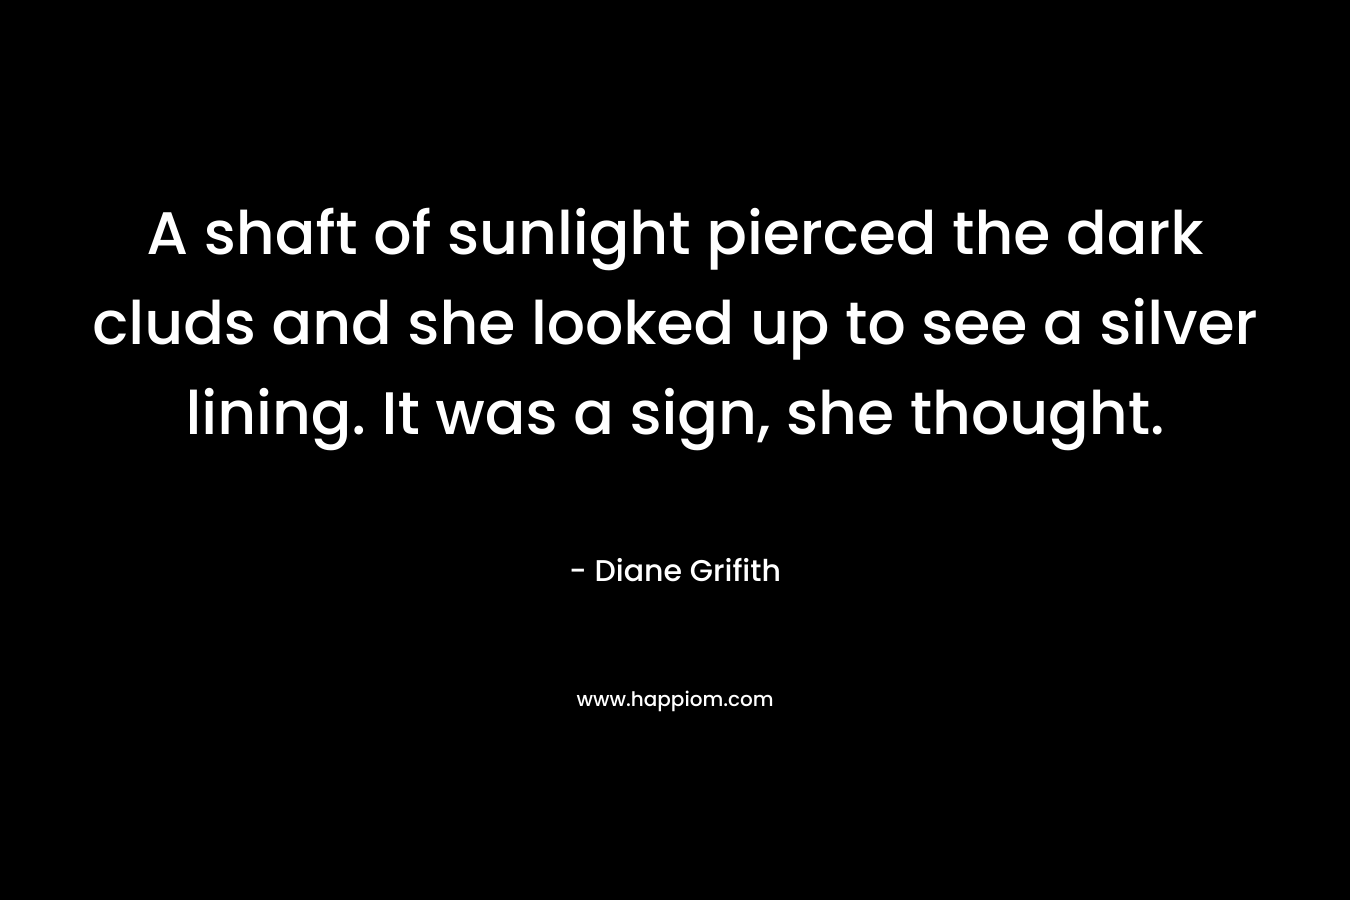 A shaft of sunlight pierced the dark cluds and she looked up to see a silver lining. It was a sign, she thought. – Diane Grifith